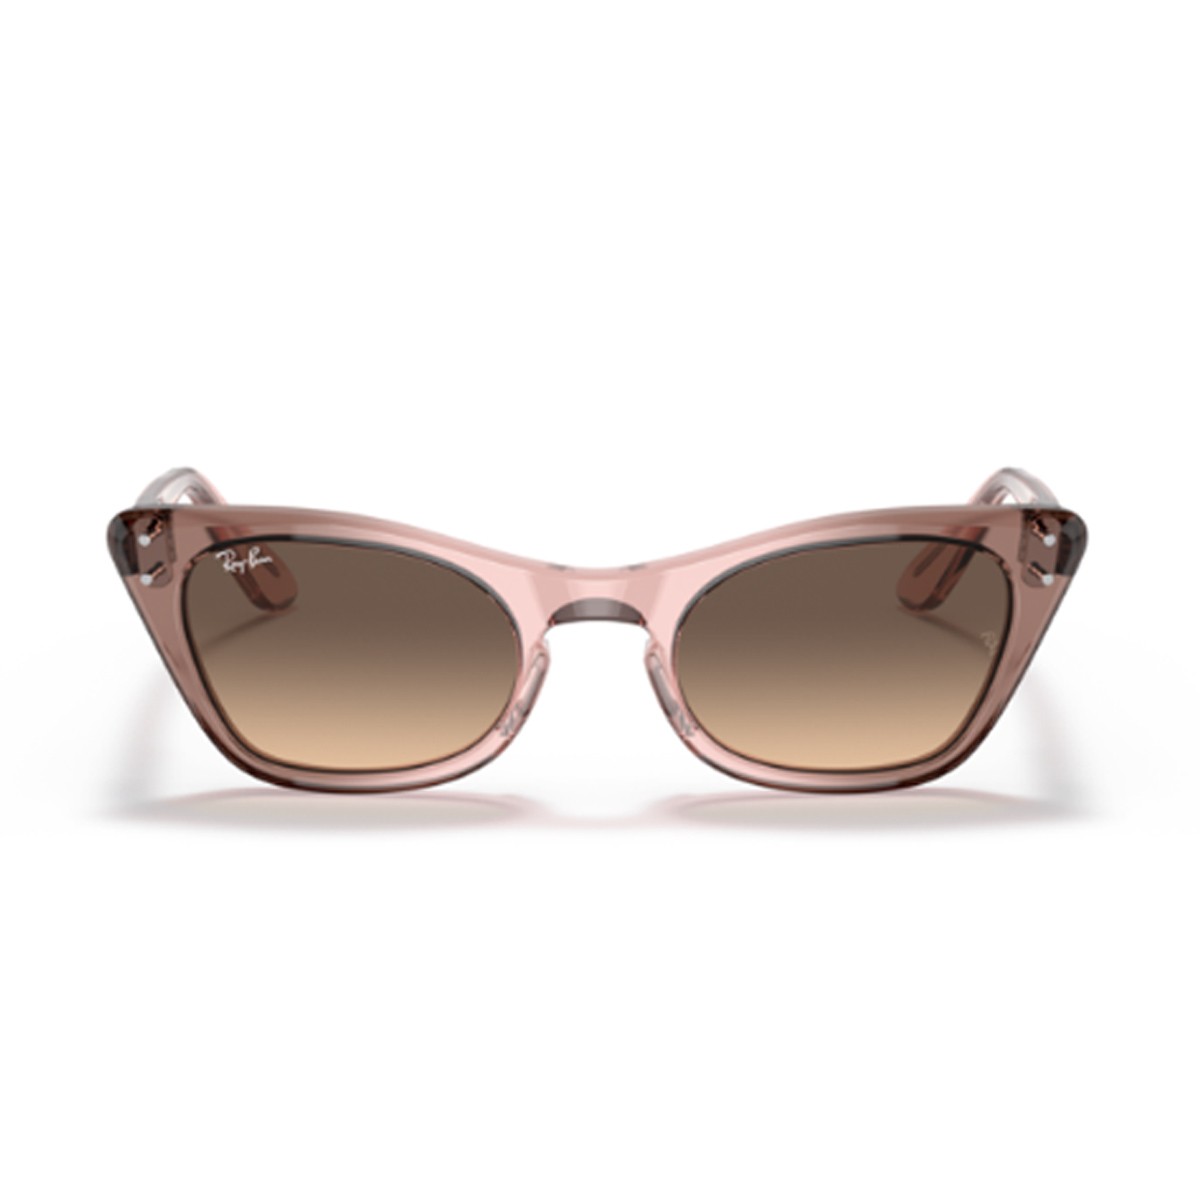 Details 220+ ray ban toddler sunglasses best